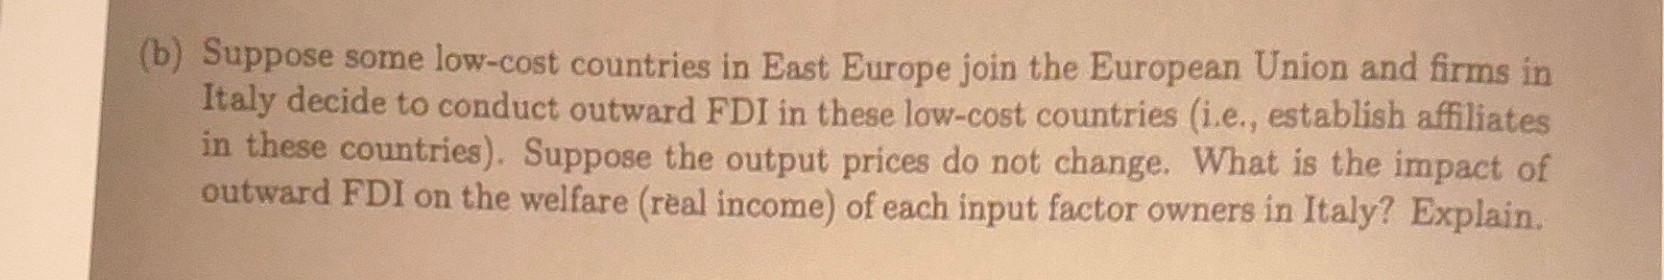 b) Suppose some low-cost countries in East Europe join the European Union and firms in Italy decide to conduct outward FDI in